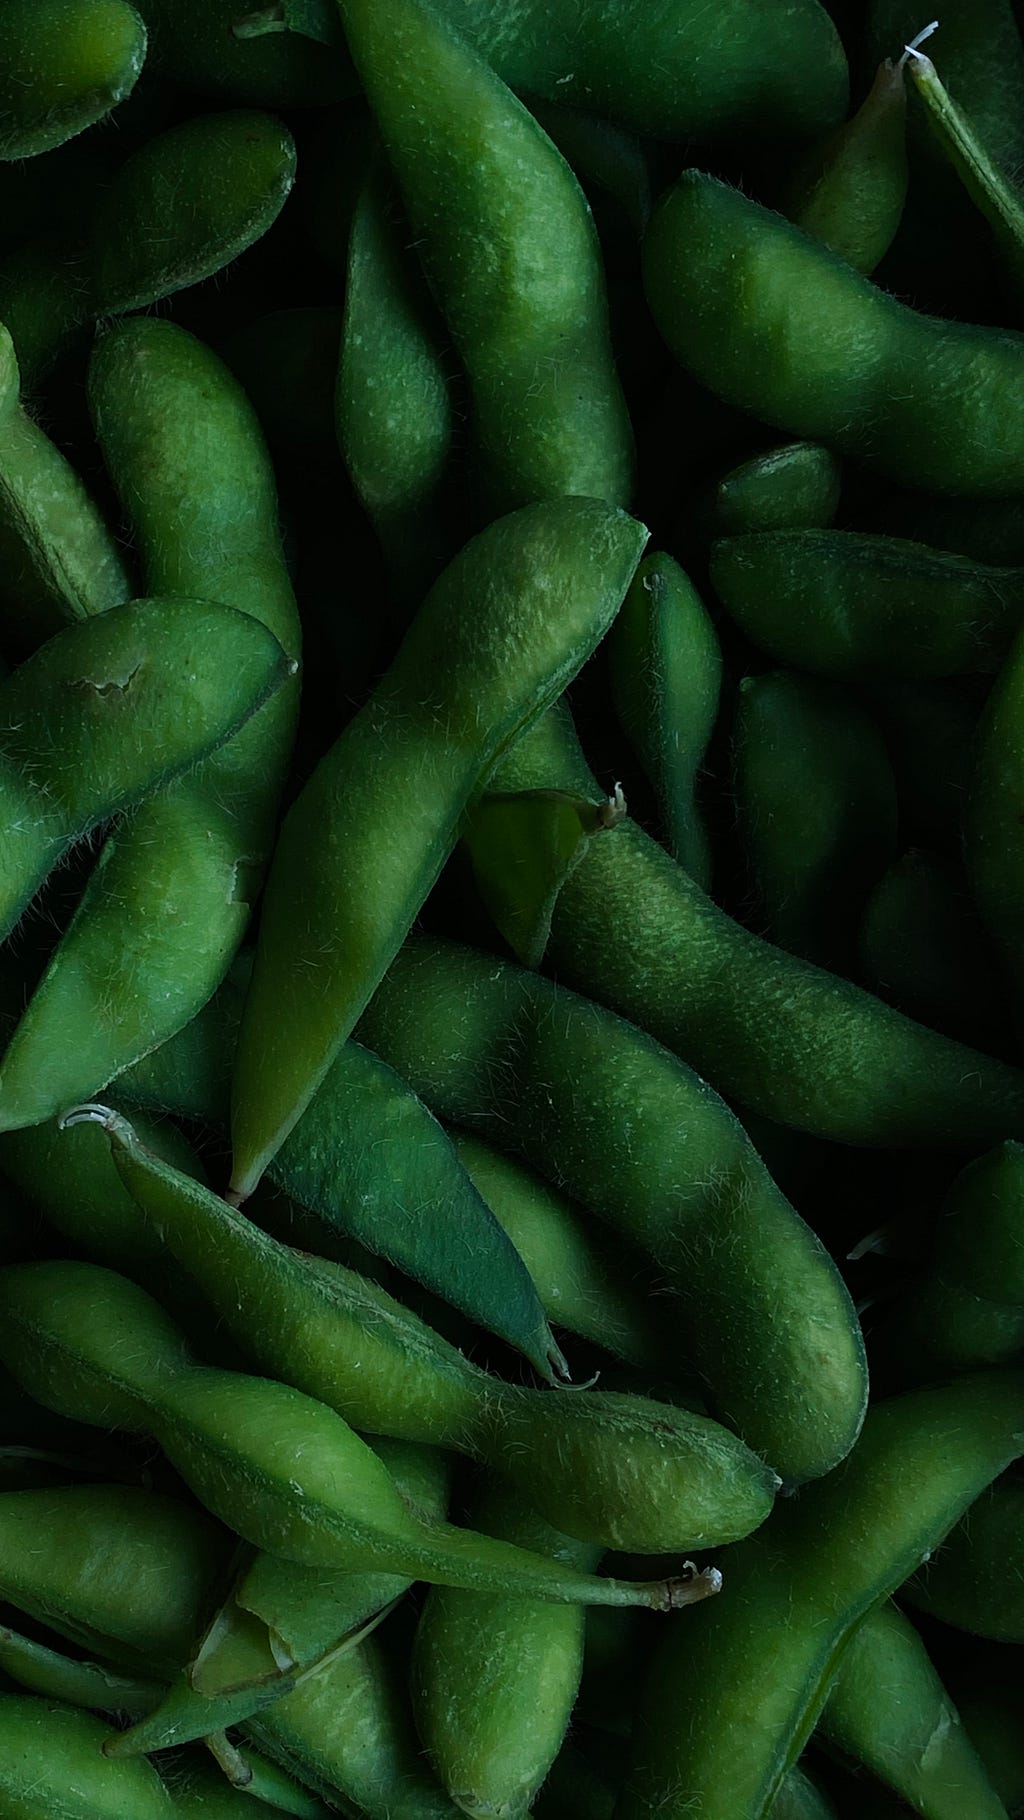 Edamame is an excellent vegan source of protein.